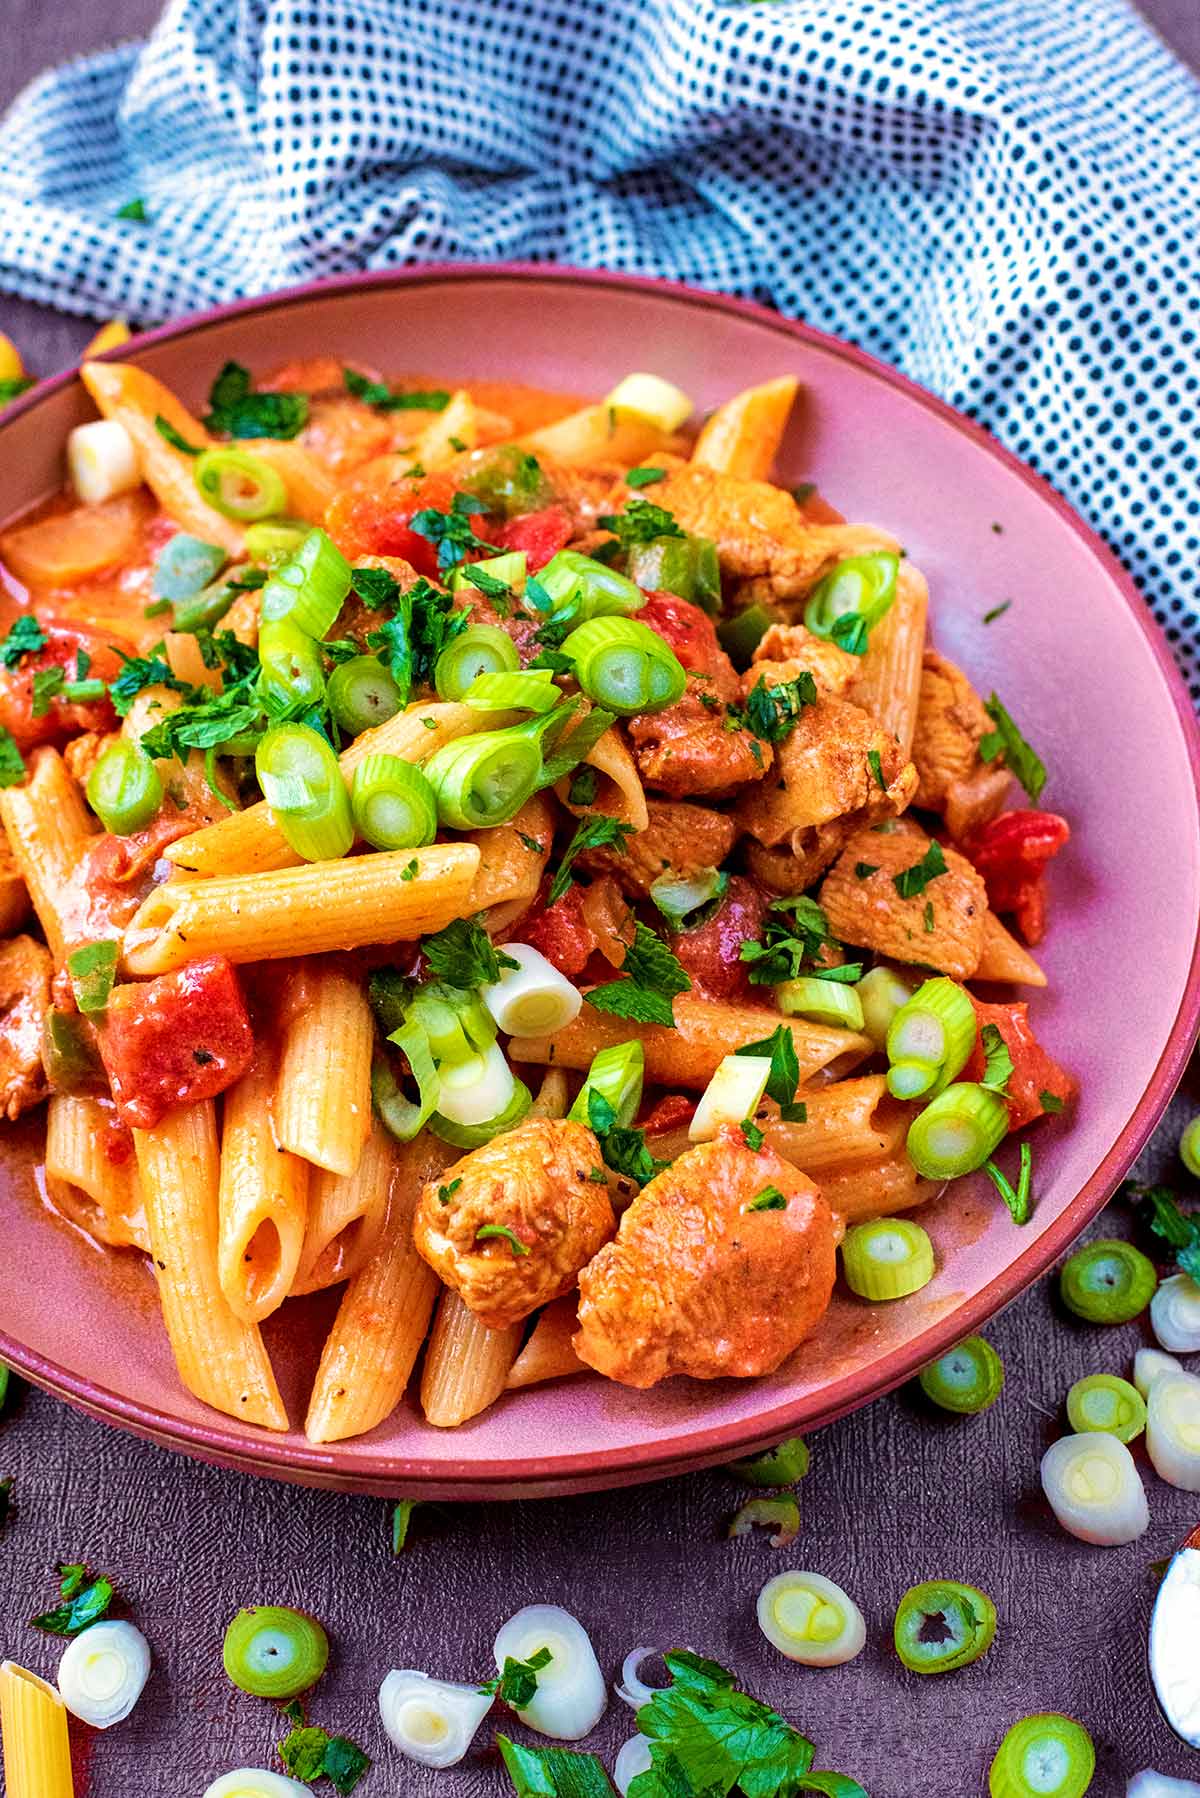 Penne pasta and chicken chunks on a plate, surrounded by chopped spring onions.